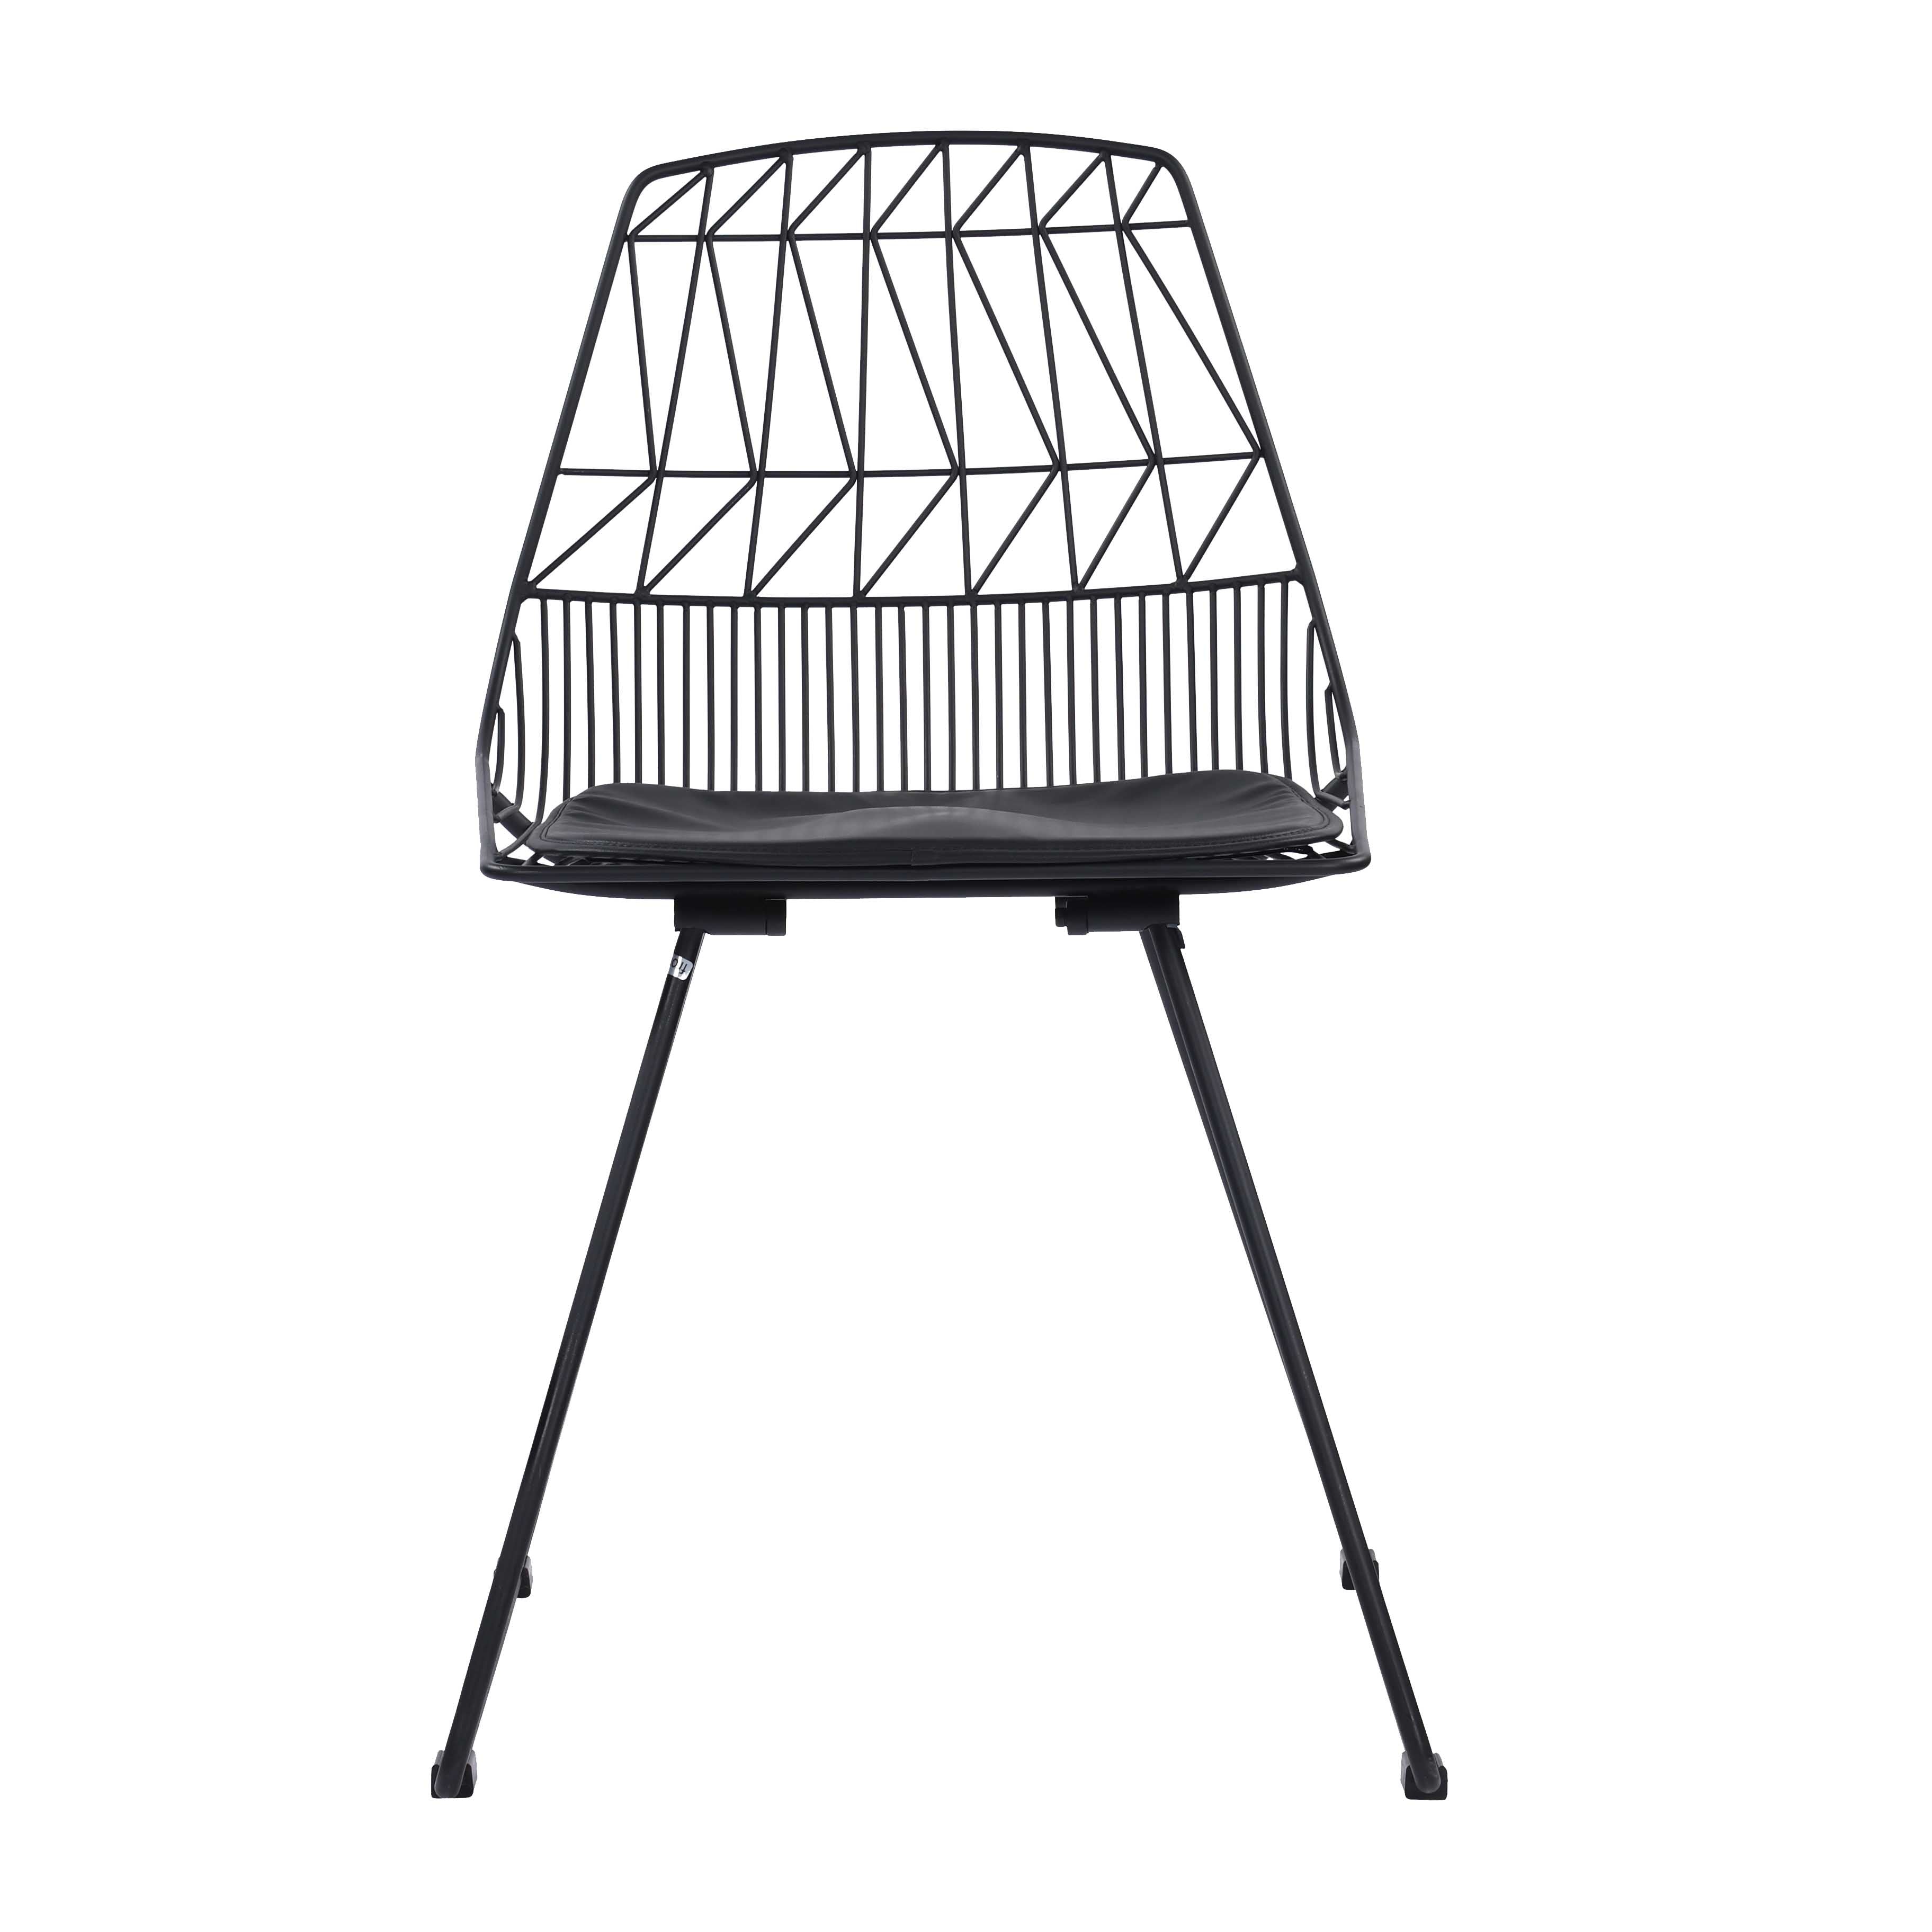 Kaya Armless Metal Wire Design Dining and Cafe Side Chairs  with Leather Seat Chair urbancart